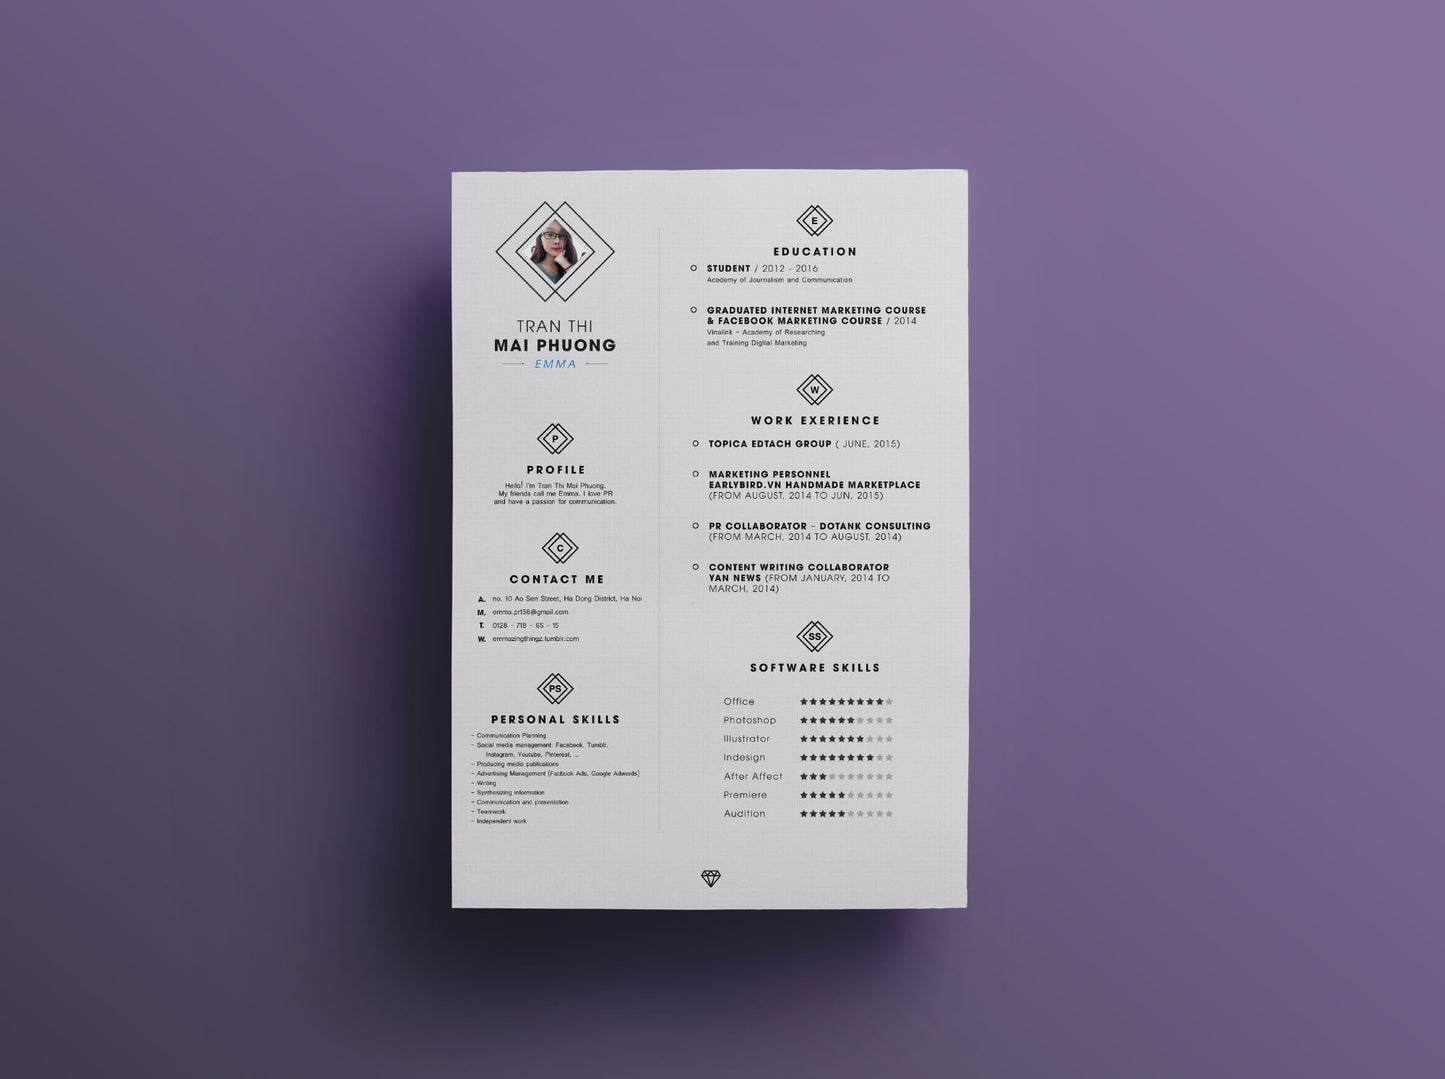 Free Neat Resume Template in Photoshop (PSD) Format